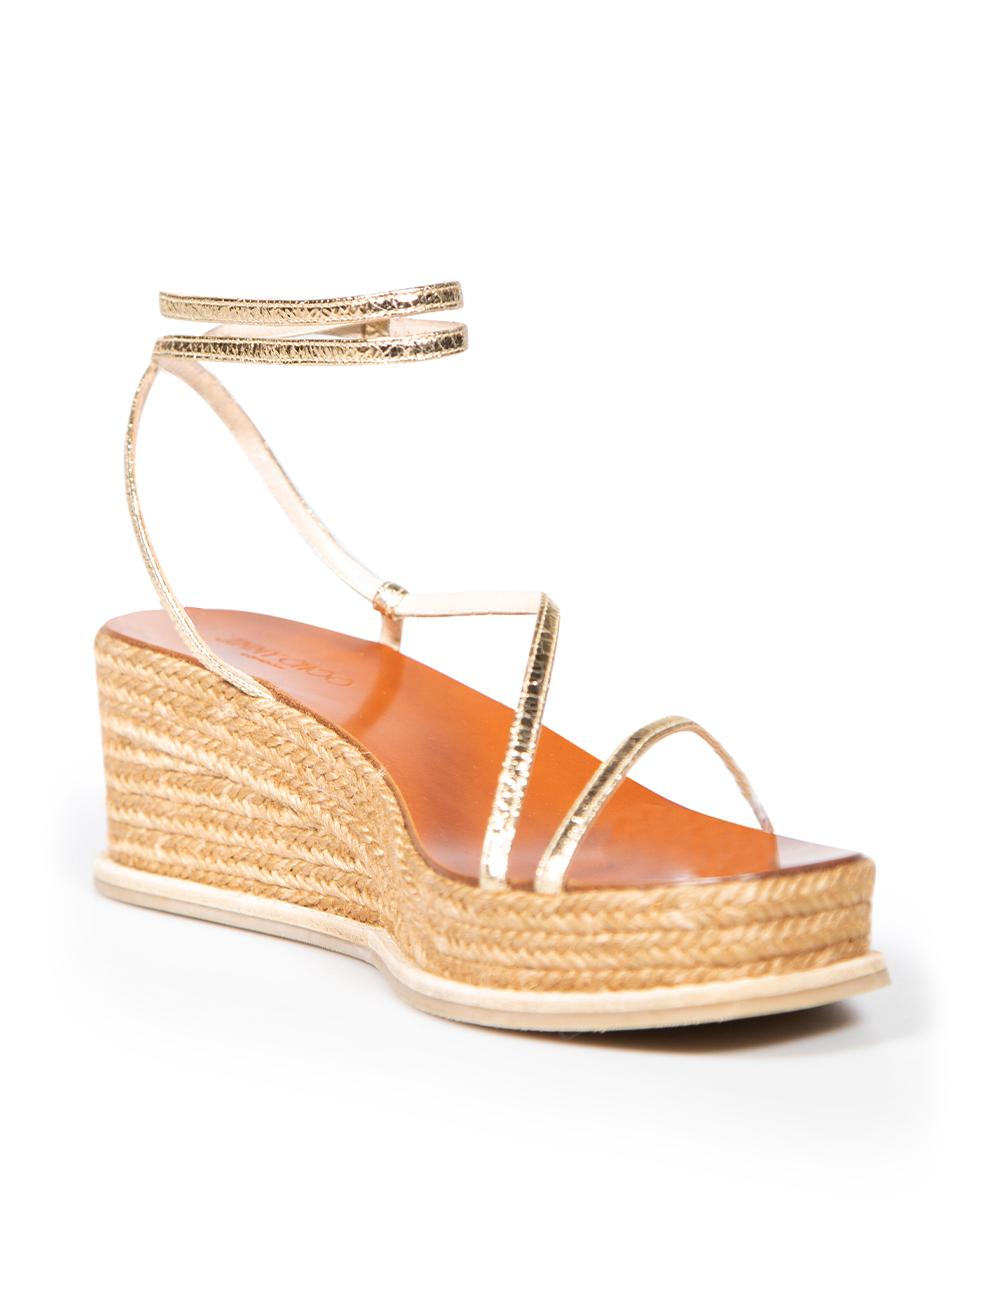 CONDITION is Very good. Hardly any visible wear to wedges is evident on this used Jimmy Choo designer resale item.
 
 
 
 Details
 
 
 Gold
 
 Leather
 
 Wedge sandals
 
 Open toe
 
 Platform
 
 Wrap around ankle strap
 
 
 
 
 
 Made in Spain
 
 
